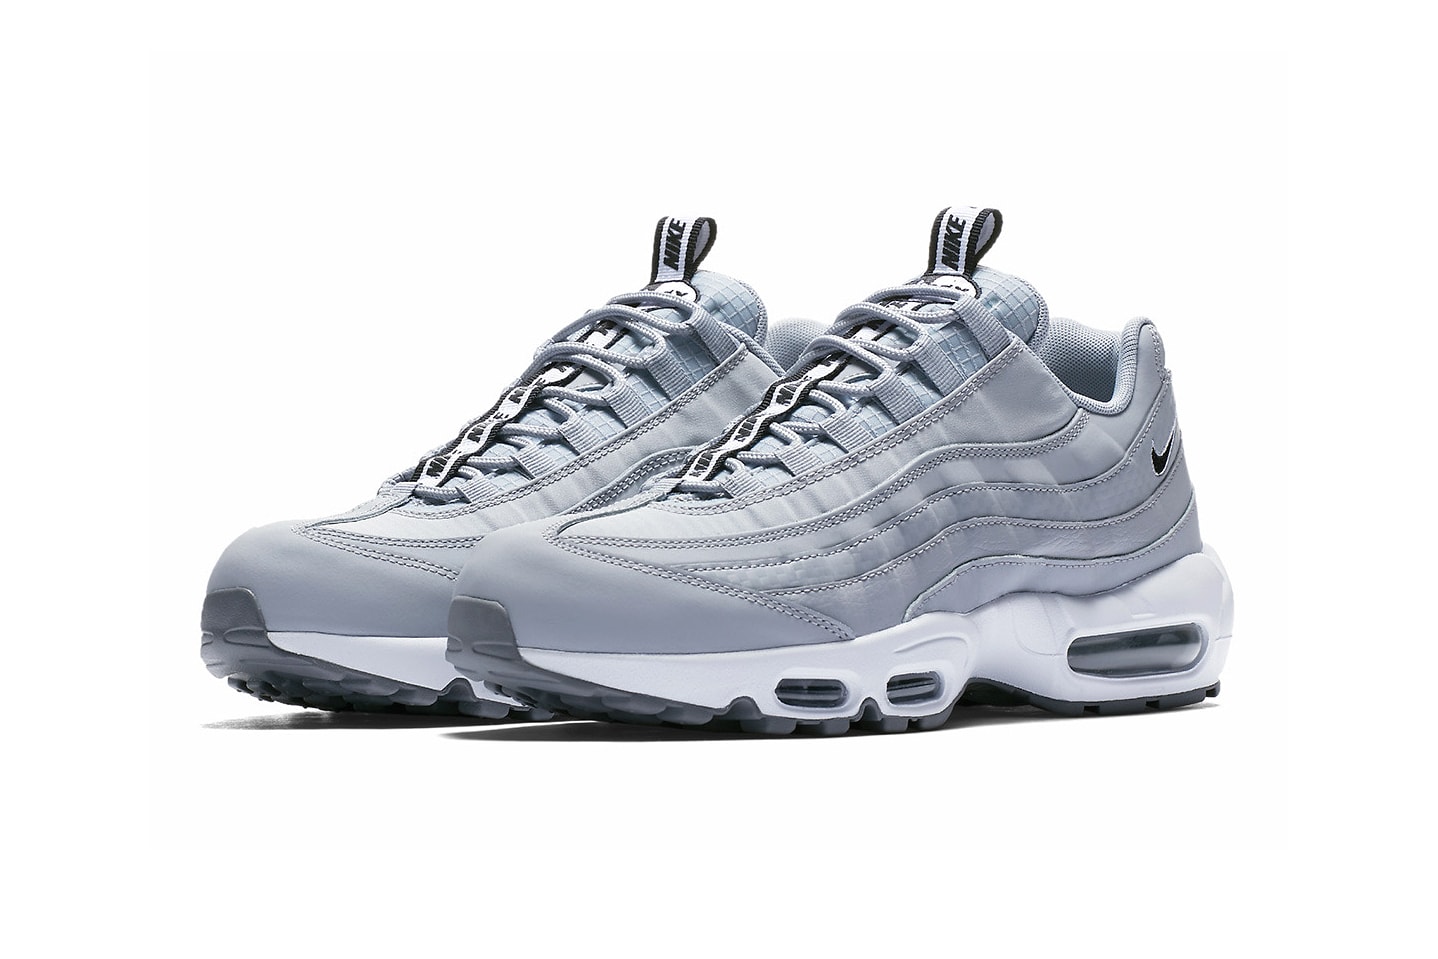 Nike Air Max 95 97 Pull Tab pack new Colorways 2018 spring summer march release date info drop sneakers shoes footwear